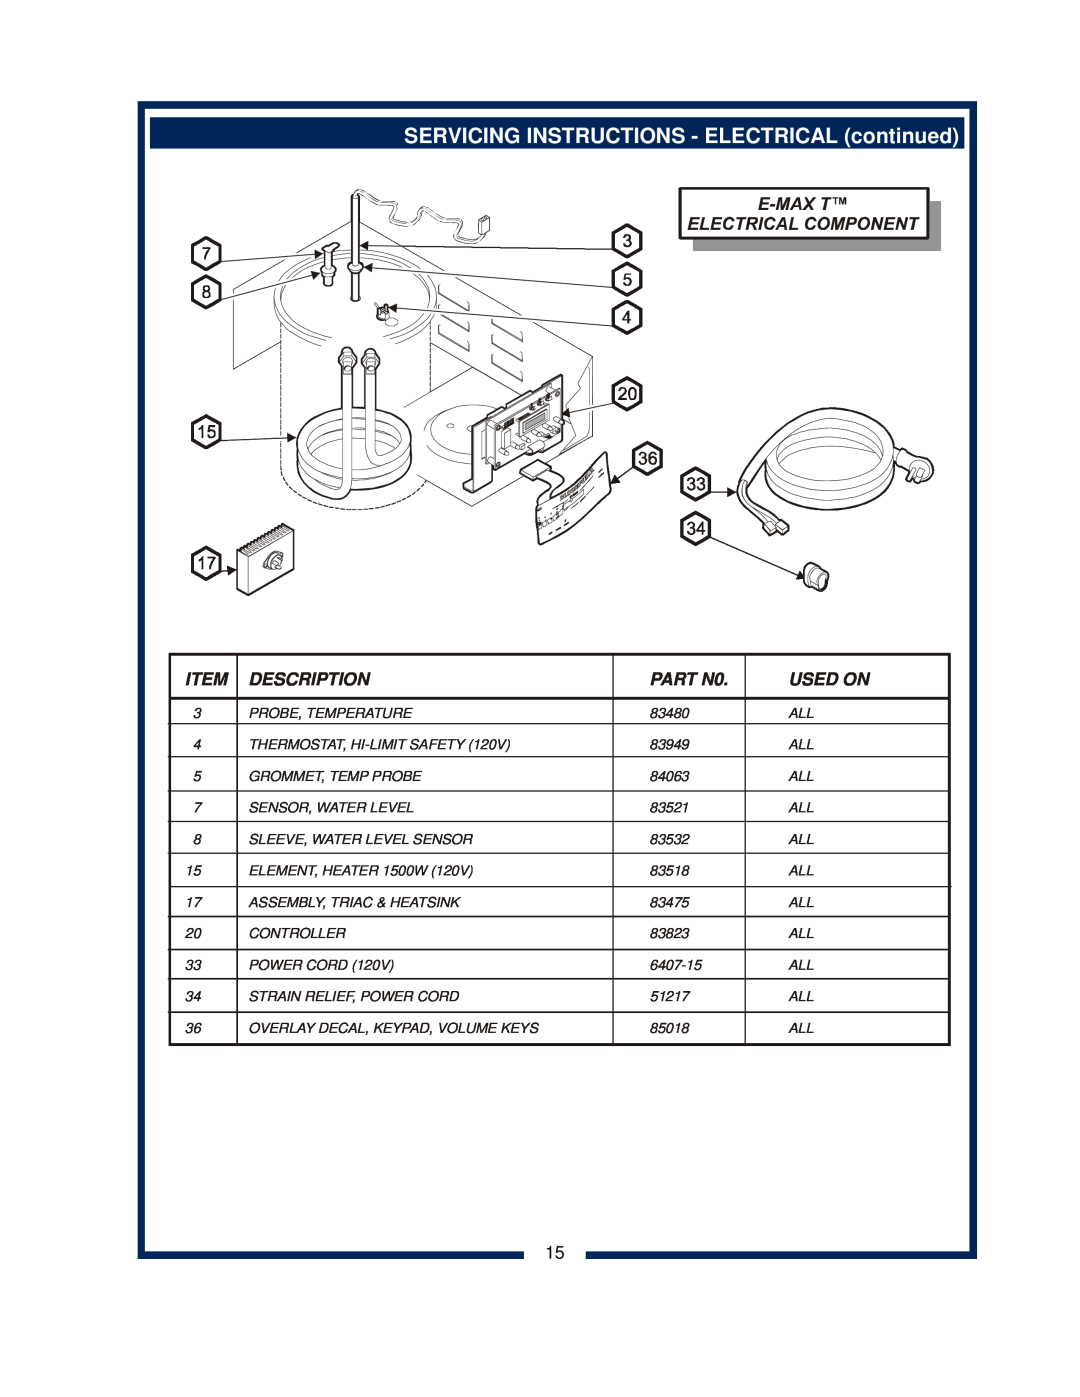 Bloomfield 2030 owner manual SERVICING INSTRUCTIONS - ELECTRICAL continued, Description, PART N0, Used On 